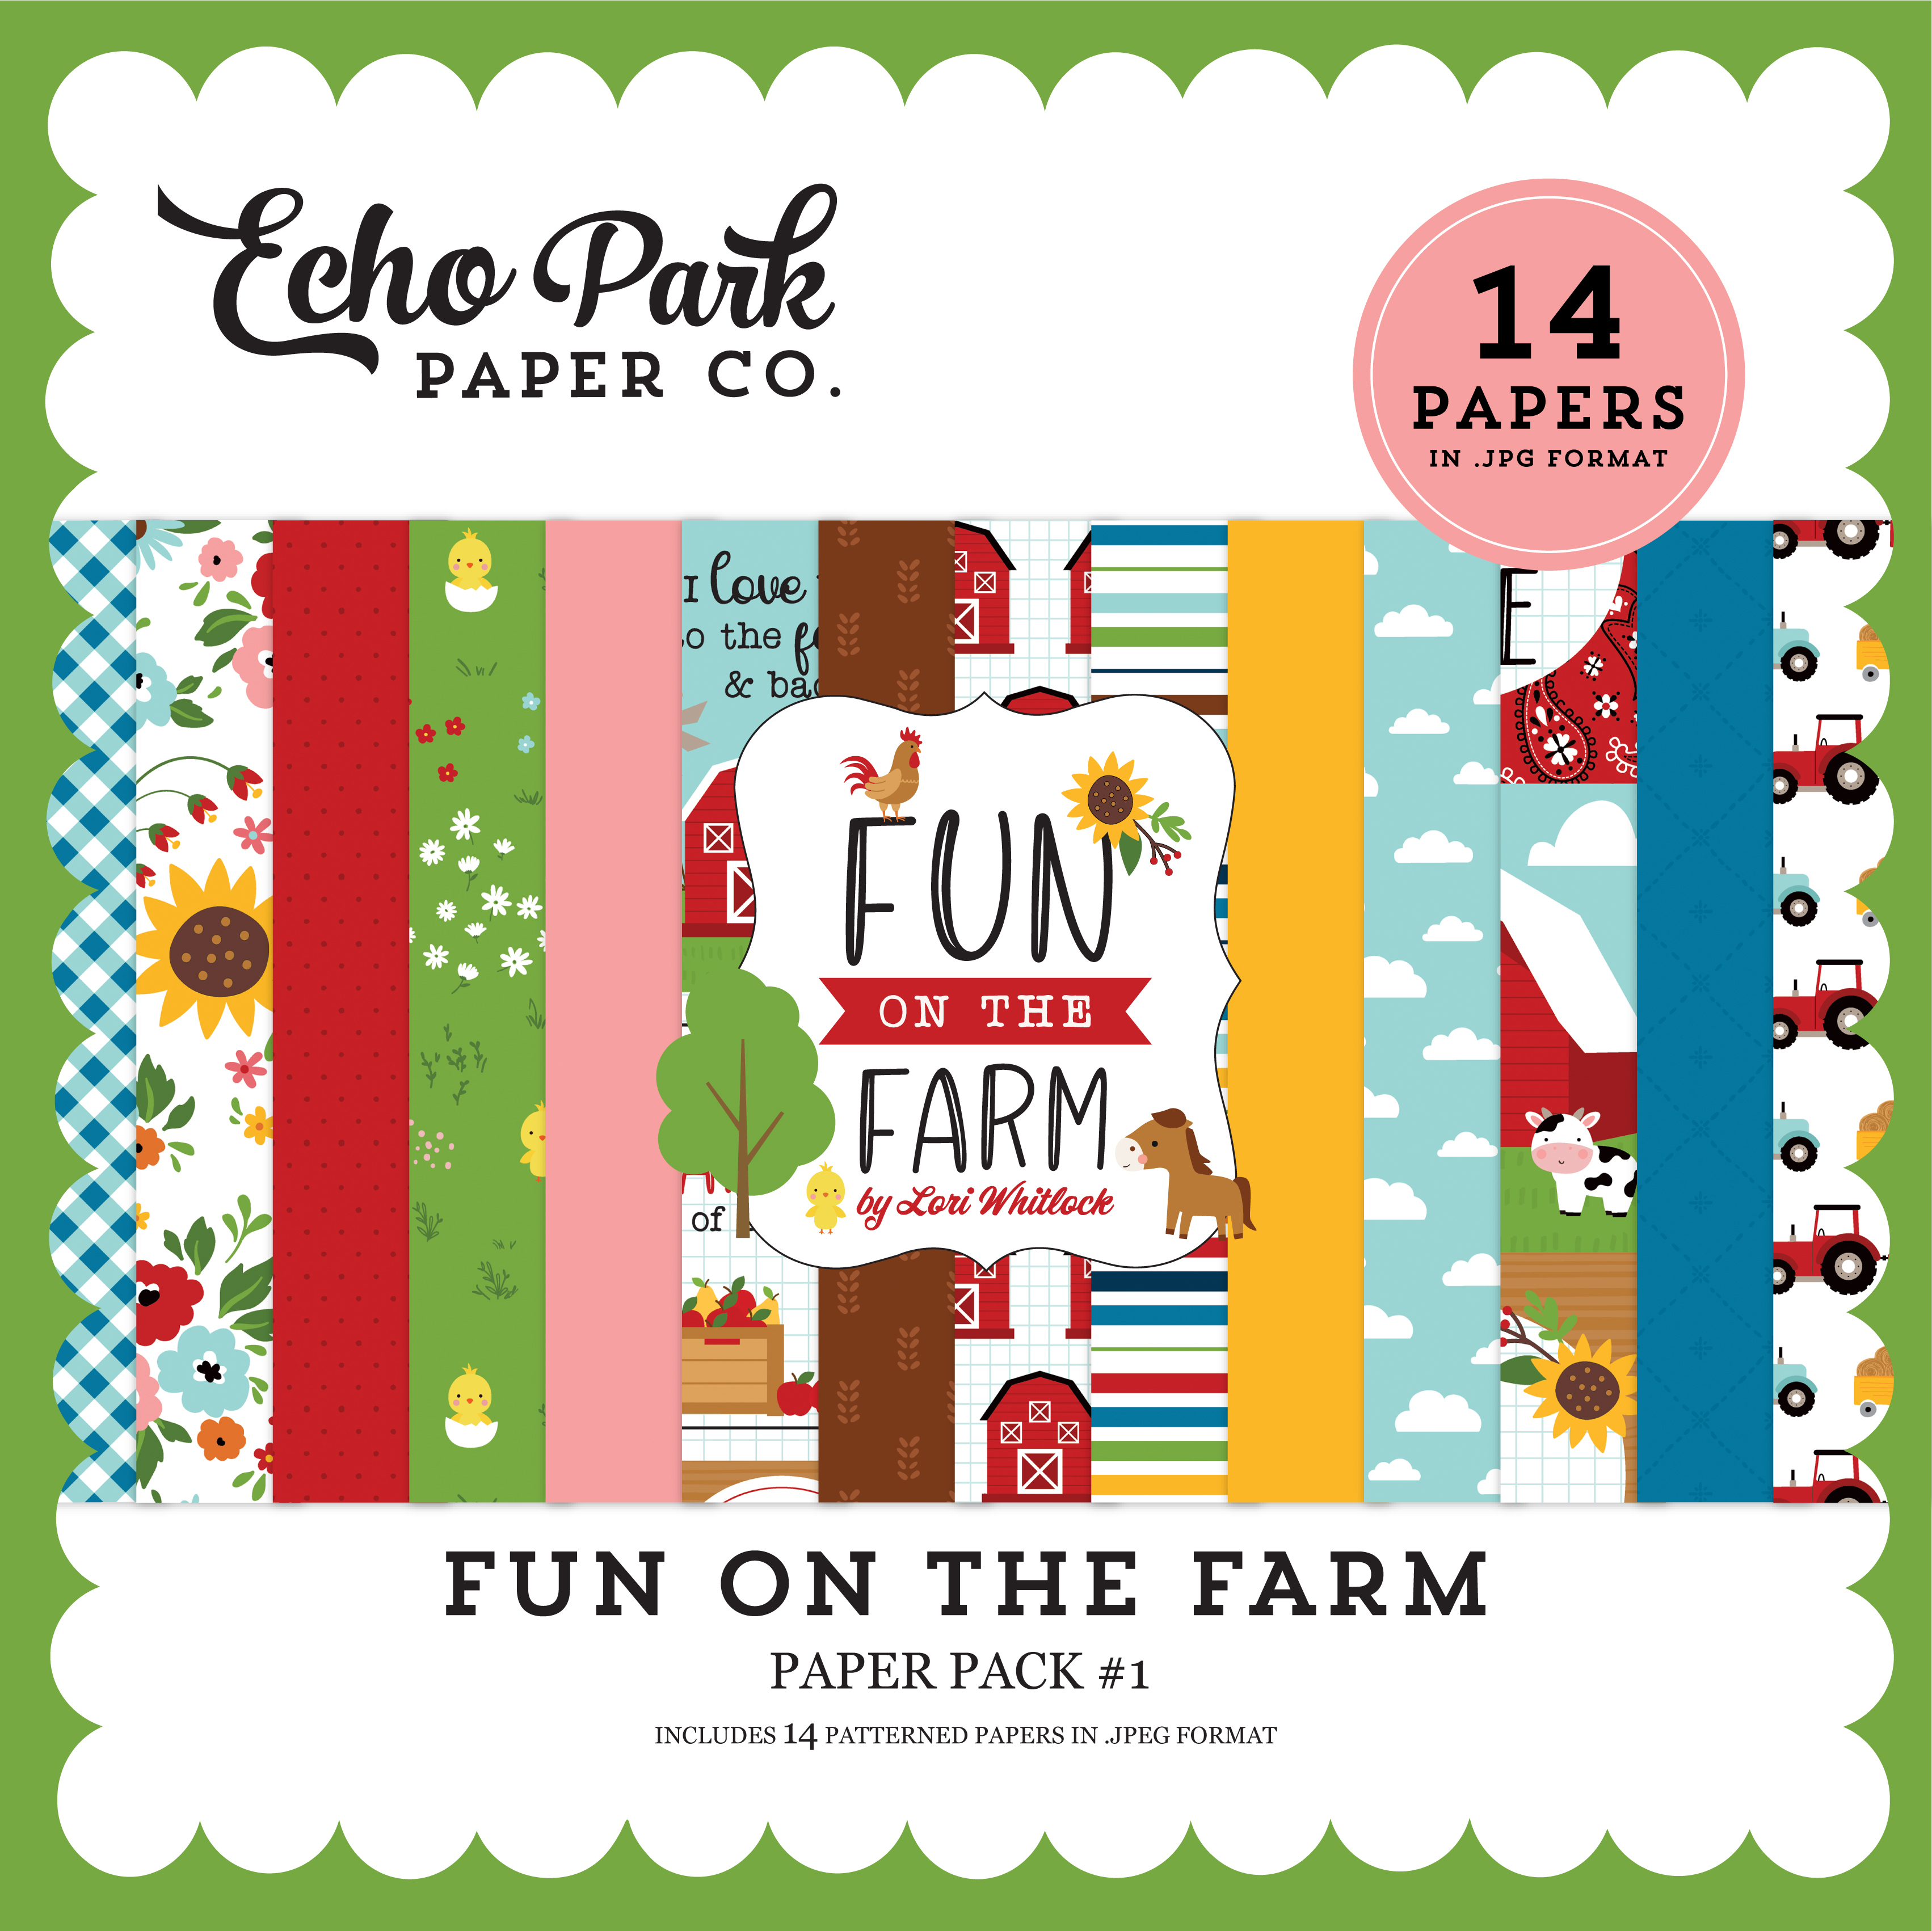 Fun on the Farm by Echo Park Paper Pack